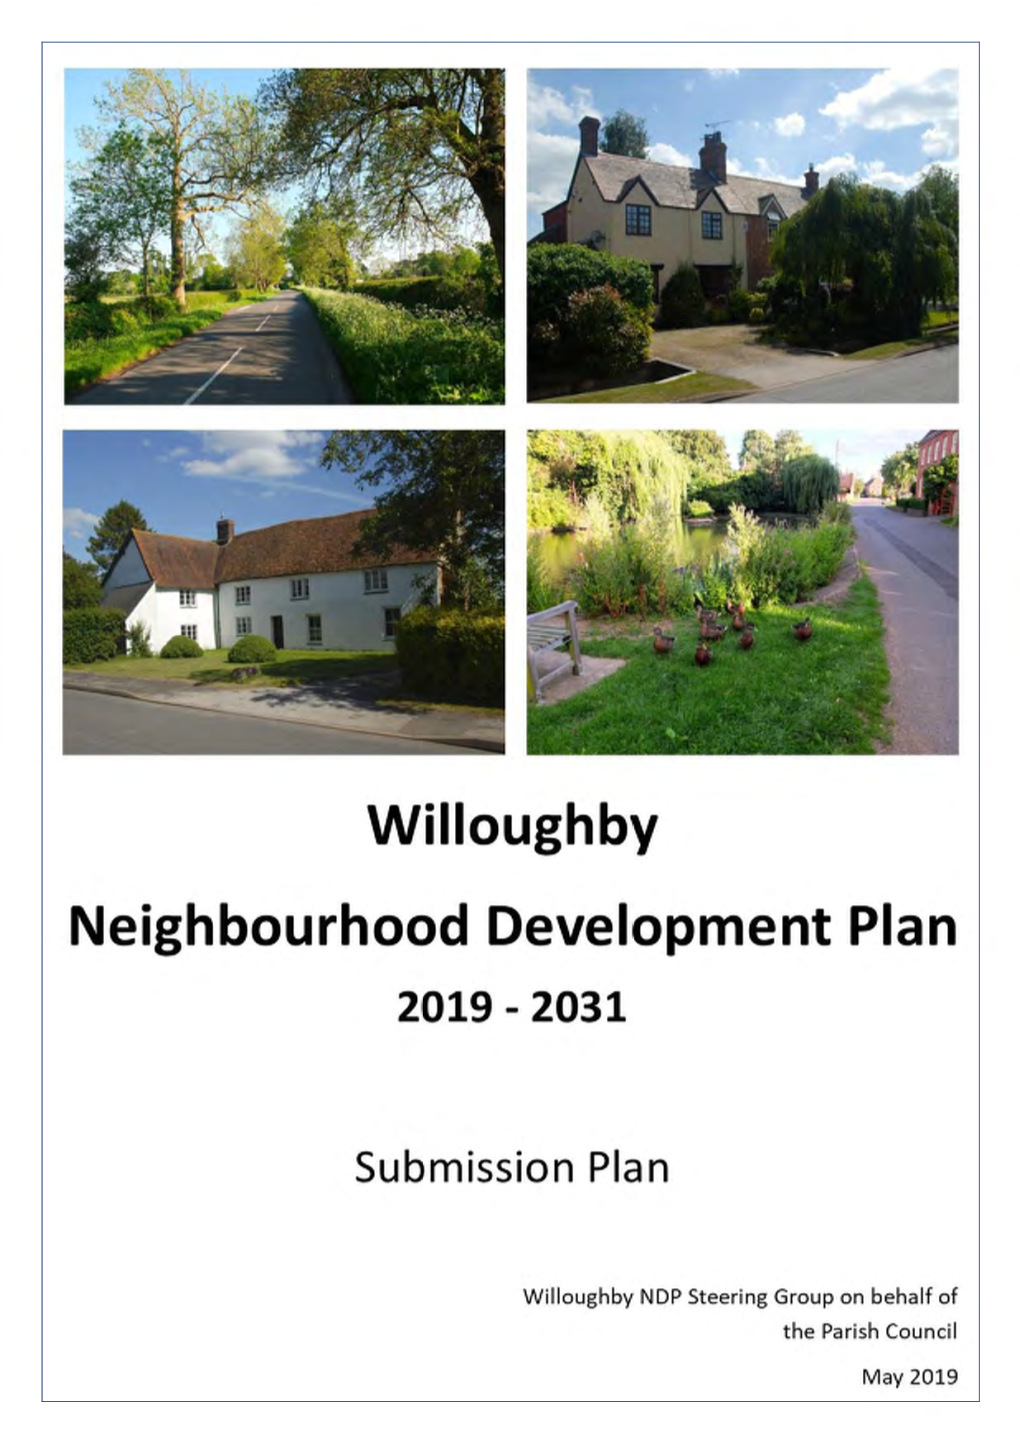 Willoughby NDP - Submission Plan, May 2019